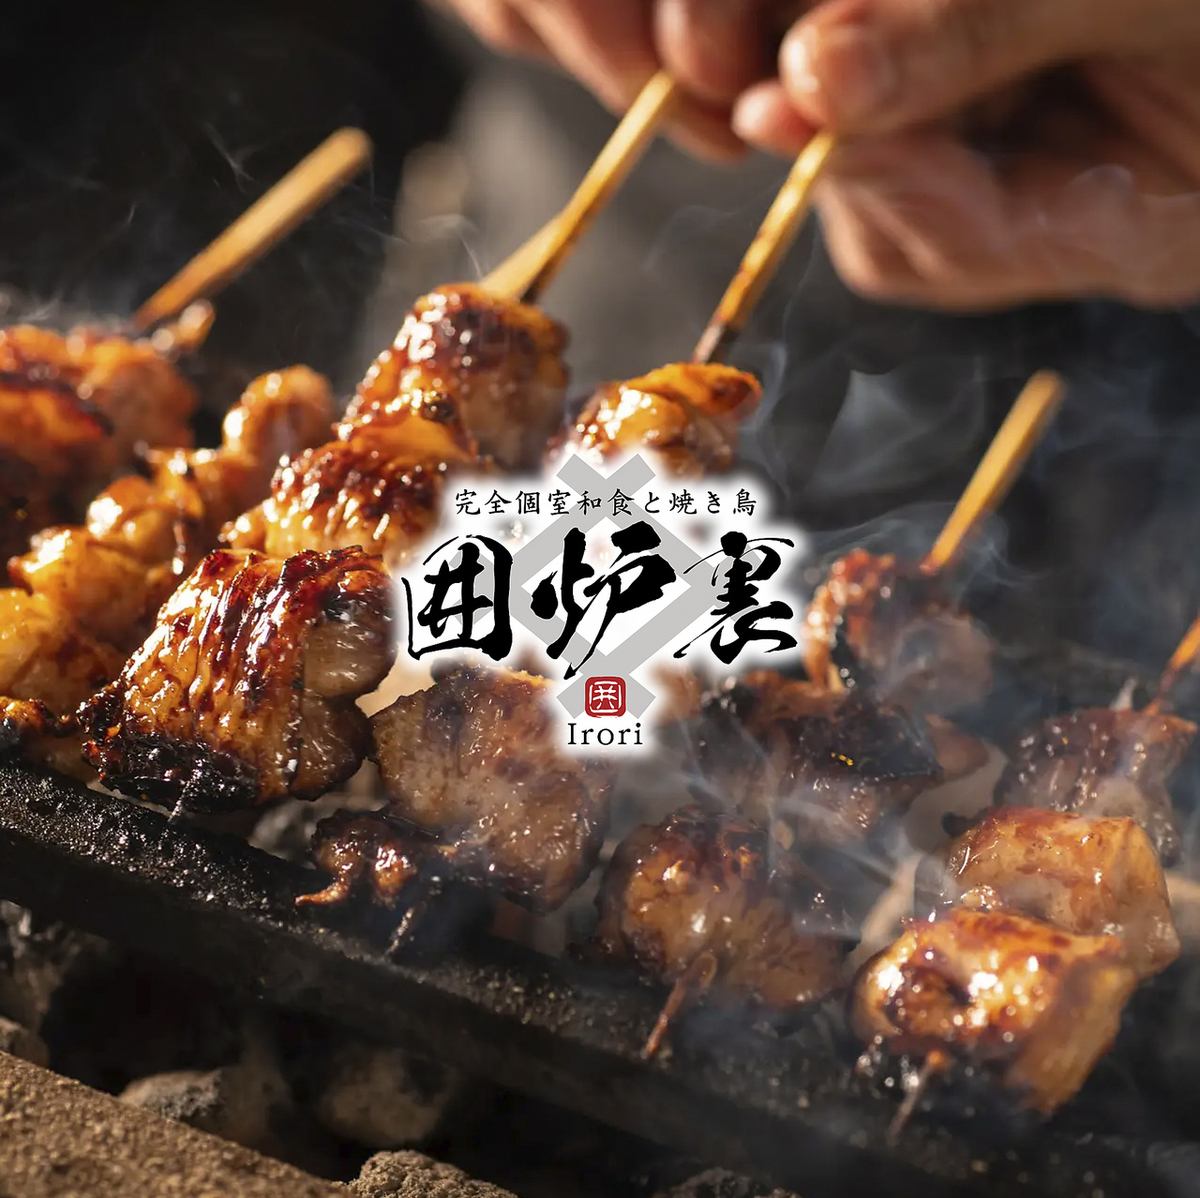 A private izakaya where you can enjoy Toyama specialties and charcoal-grilled yakitori.